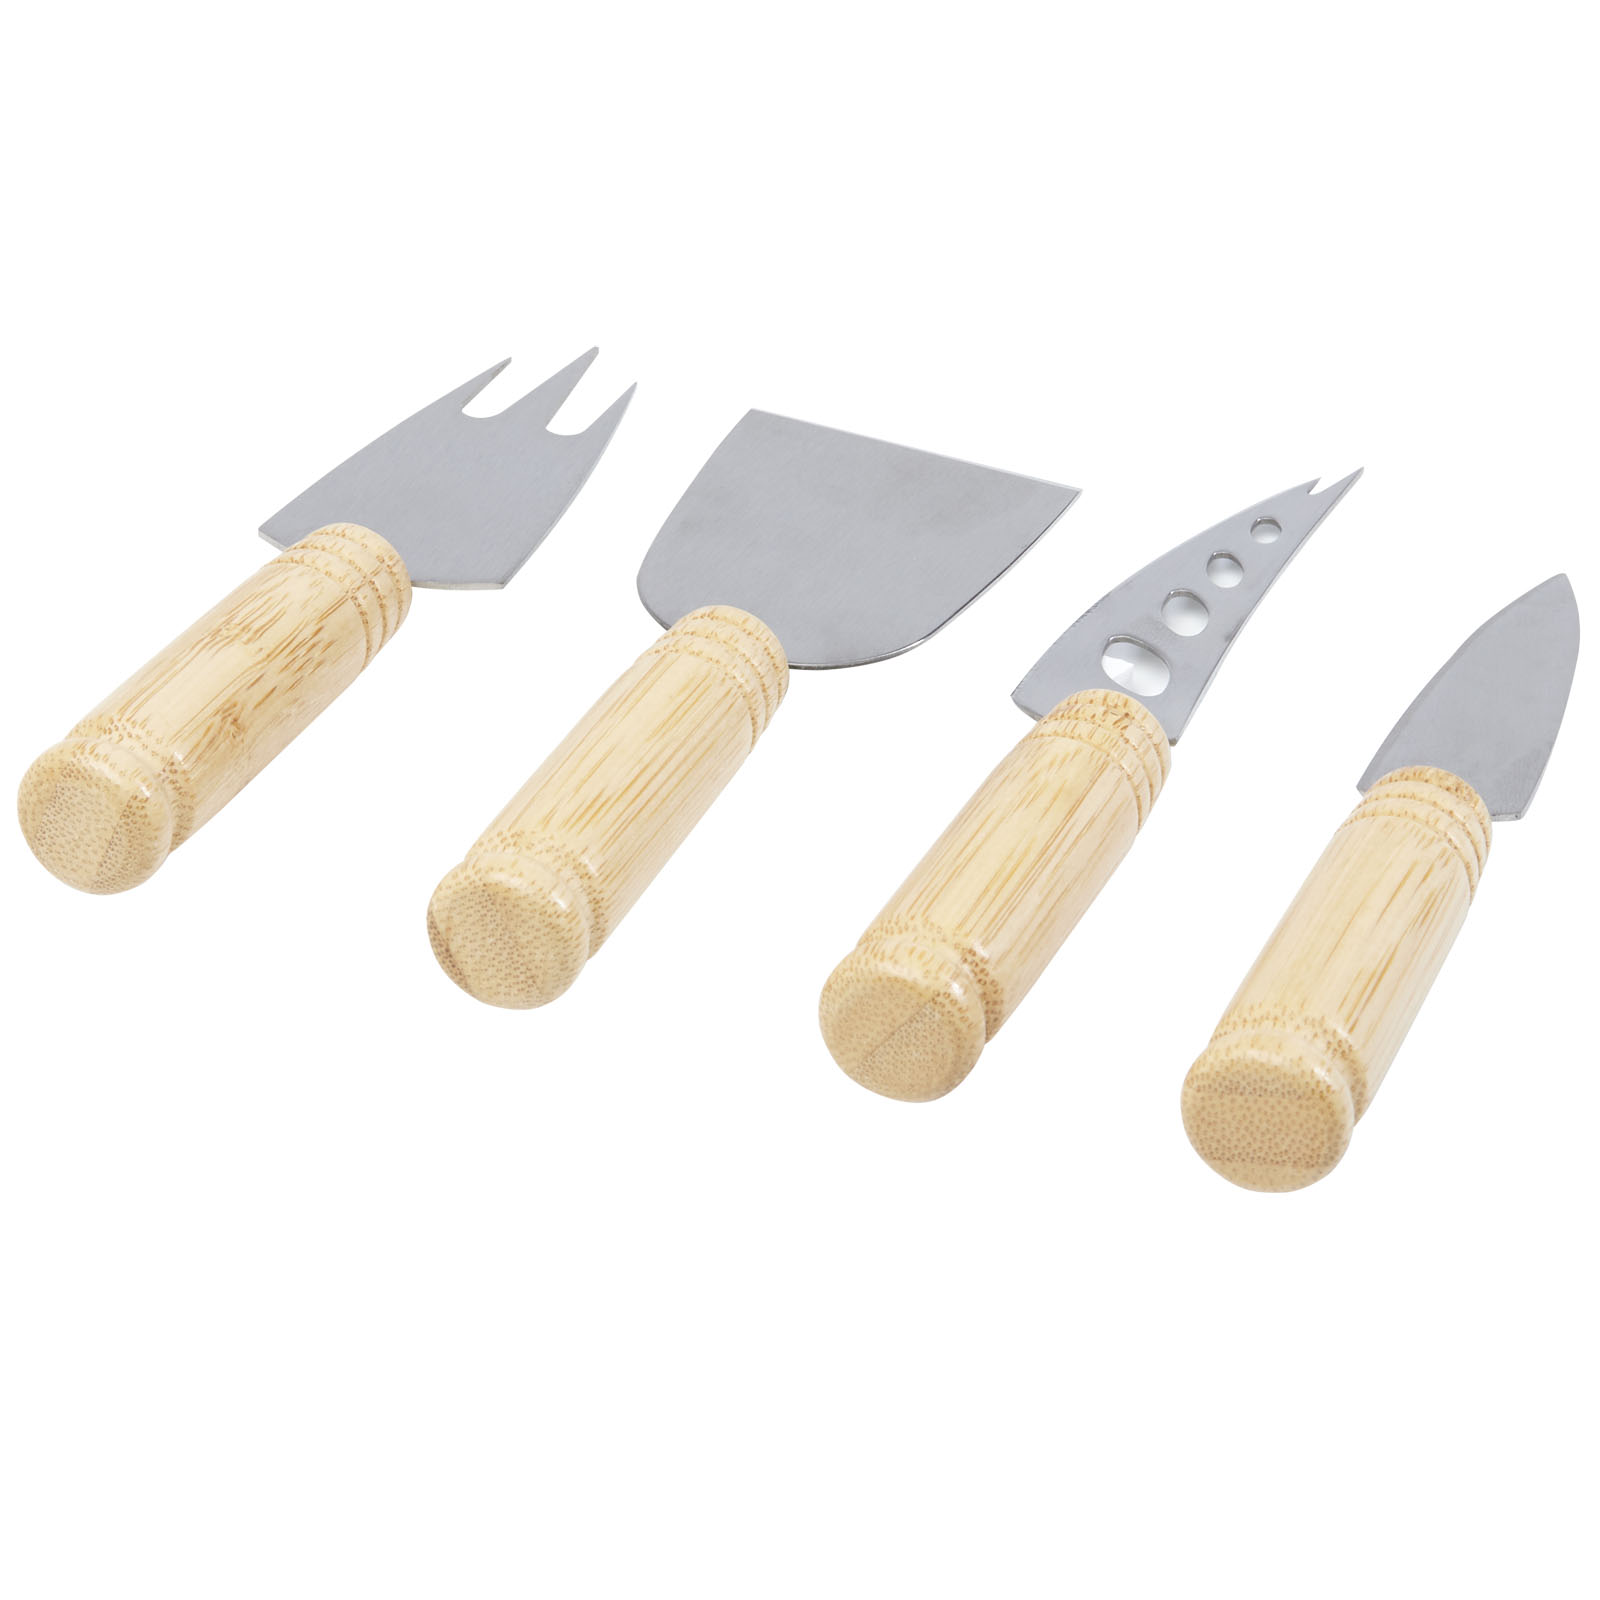 Advertising Kitchenware - Cheds 4-piece bamboo cheese set - 0